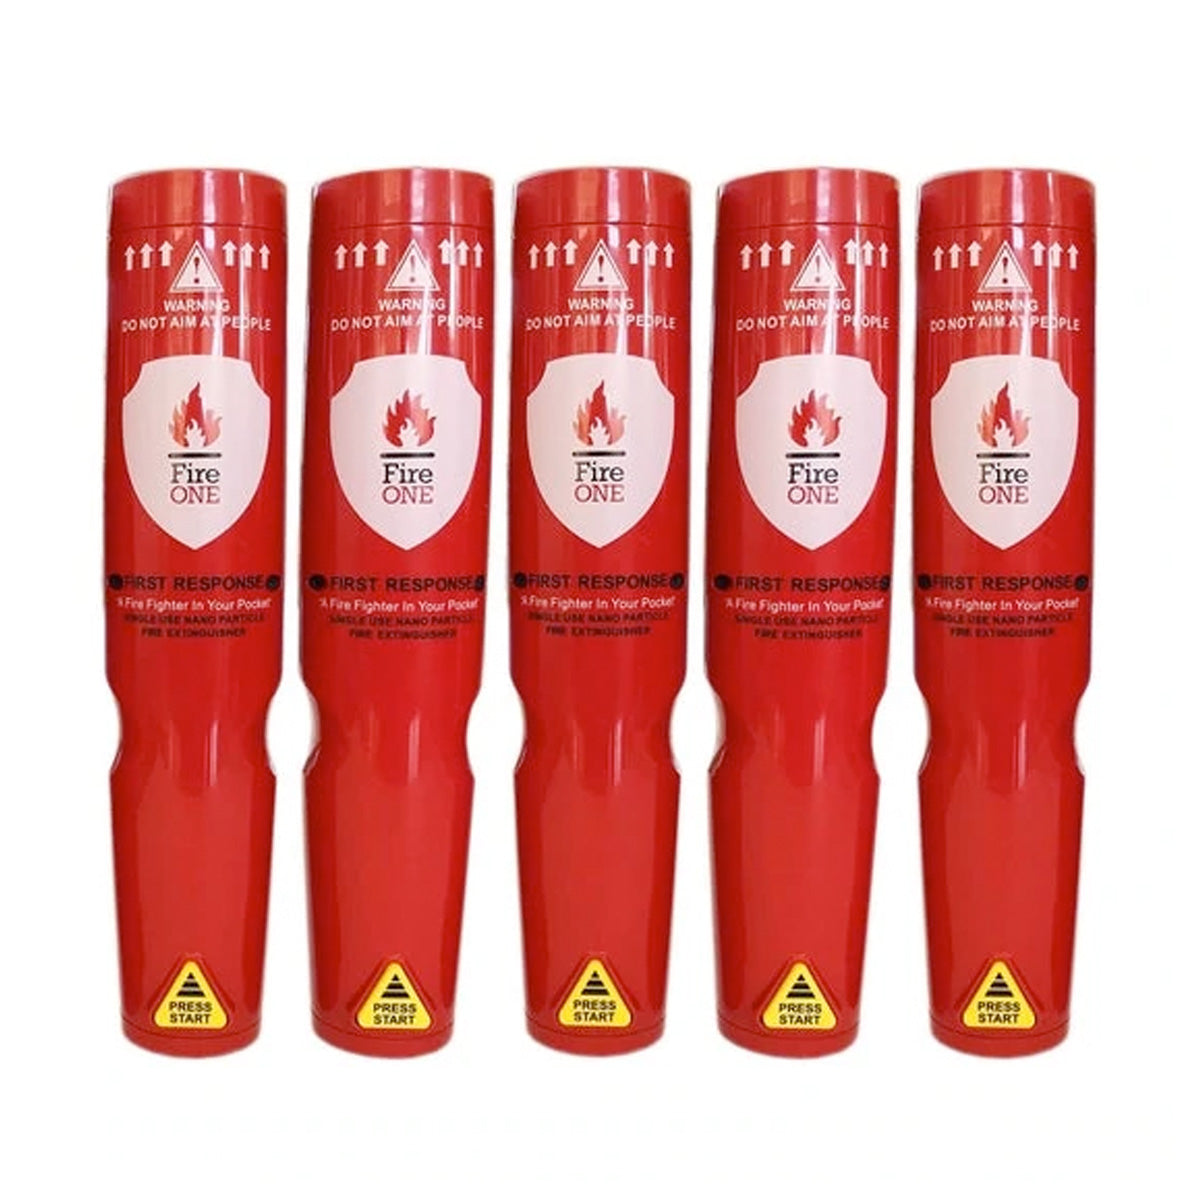 Fire One First Response Portable Fire Extinguisher Five Units (Save $25) Tactical Distributors Ltd New Zealand